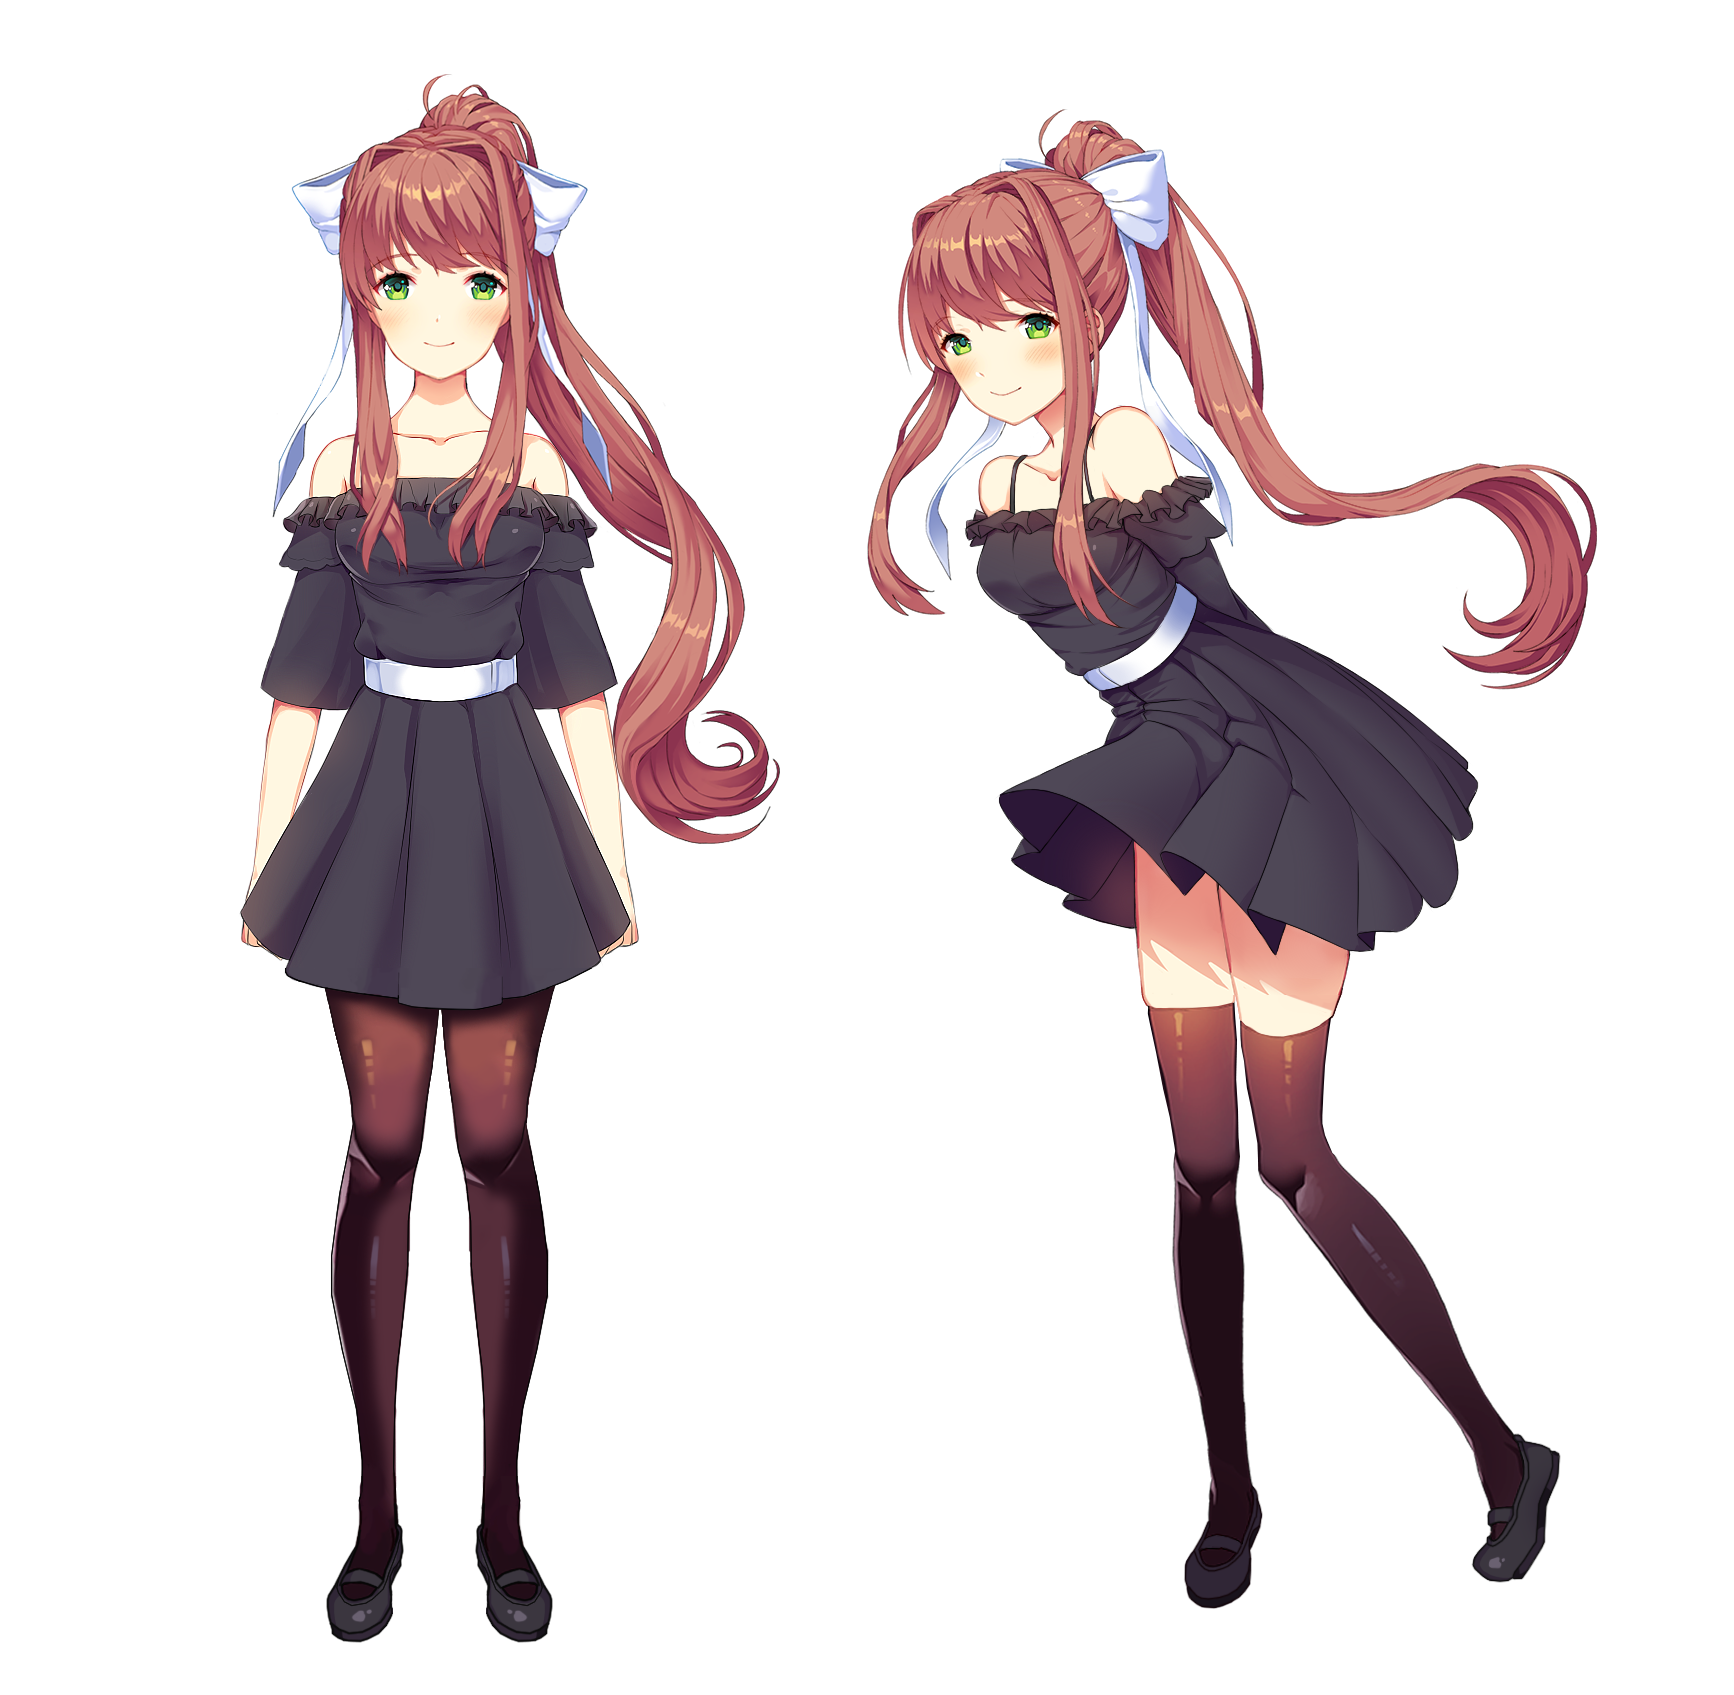 Monika After Story (Casual)